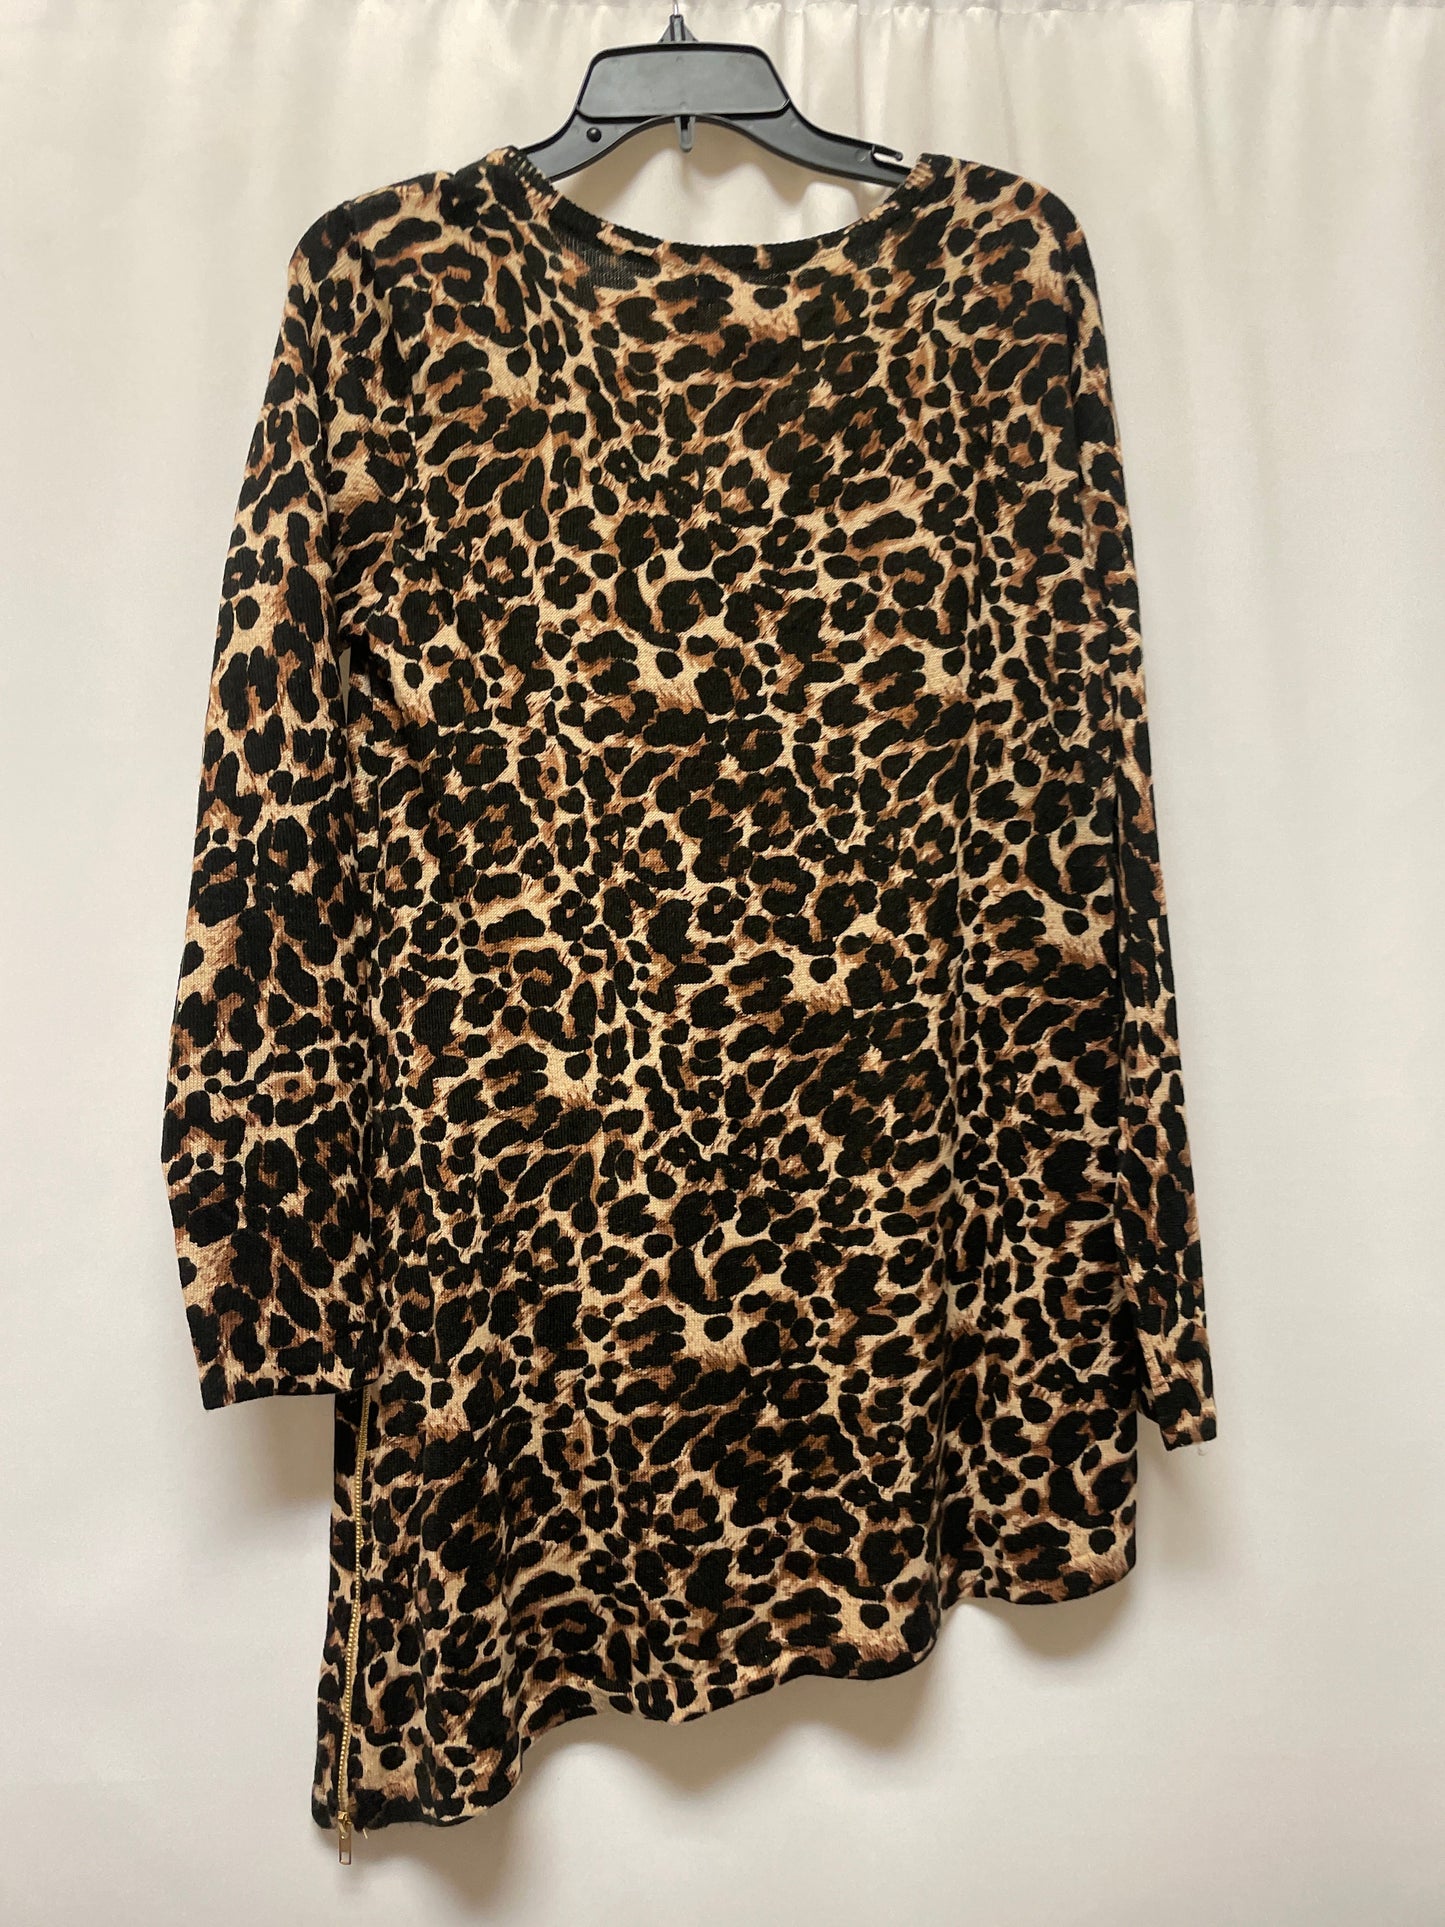 Animal Print Top Long Sleeve New York And Co, Size M